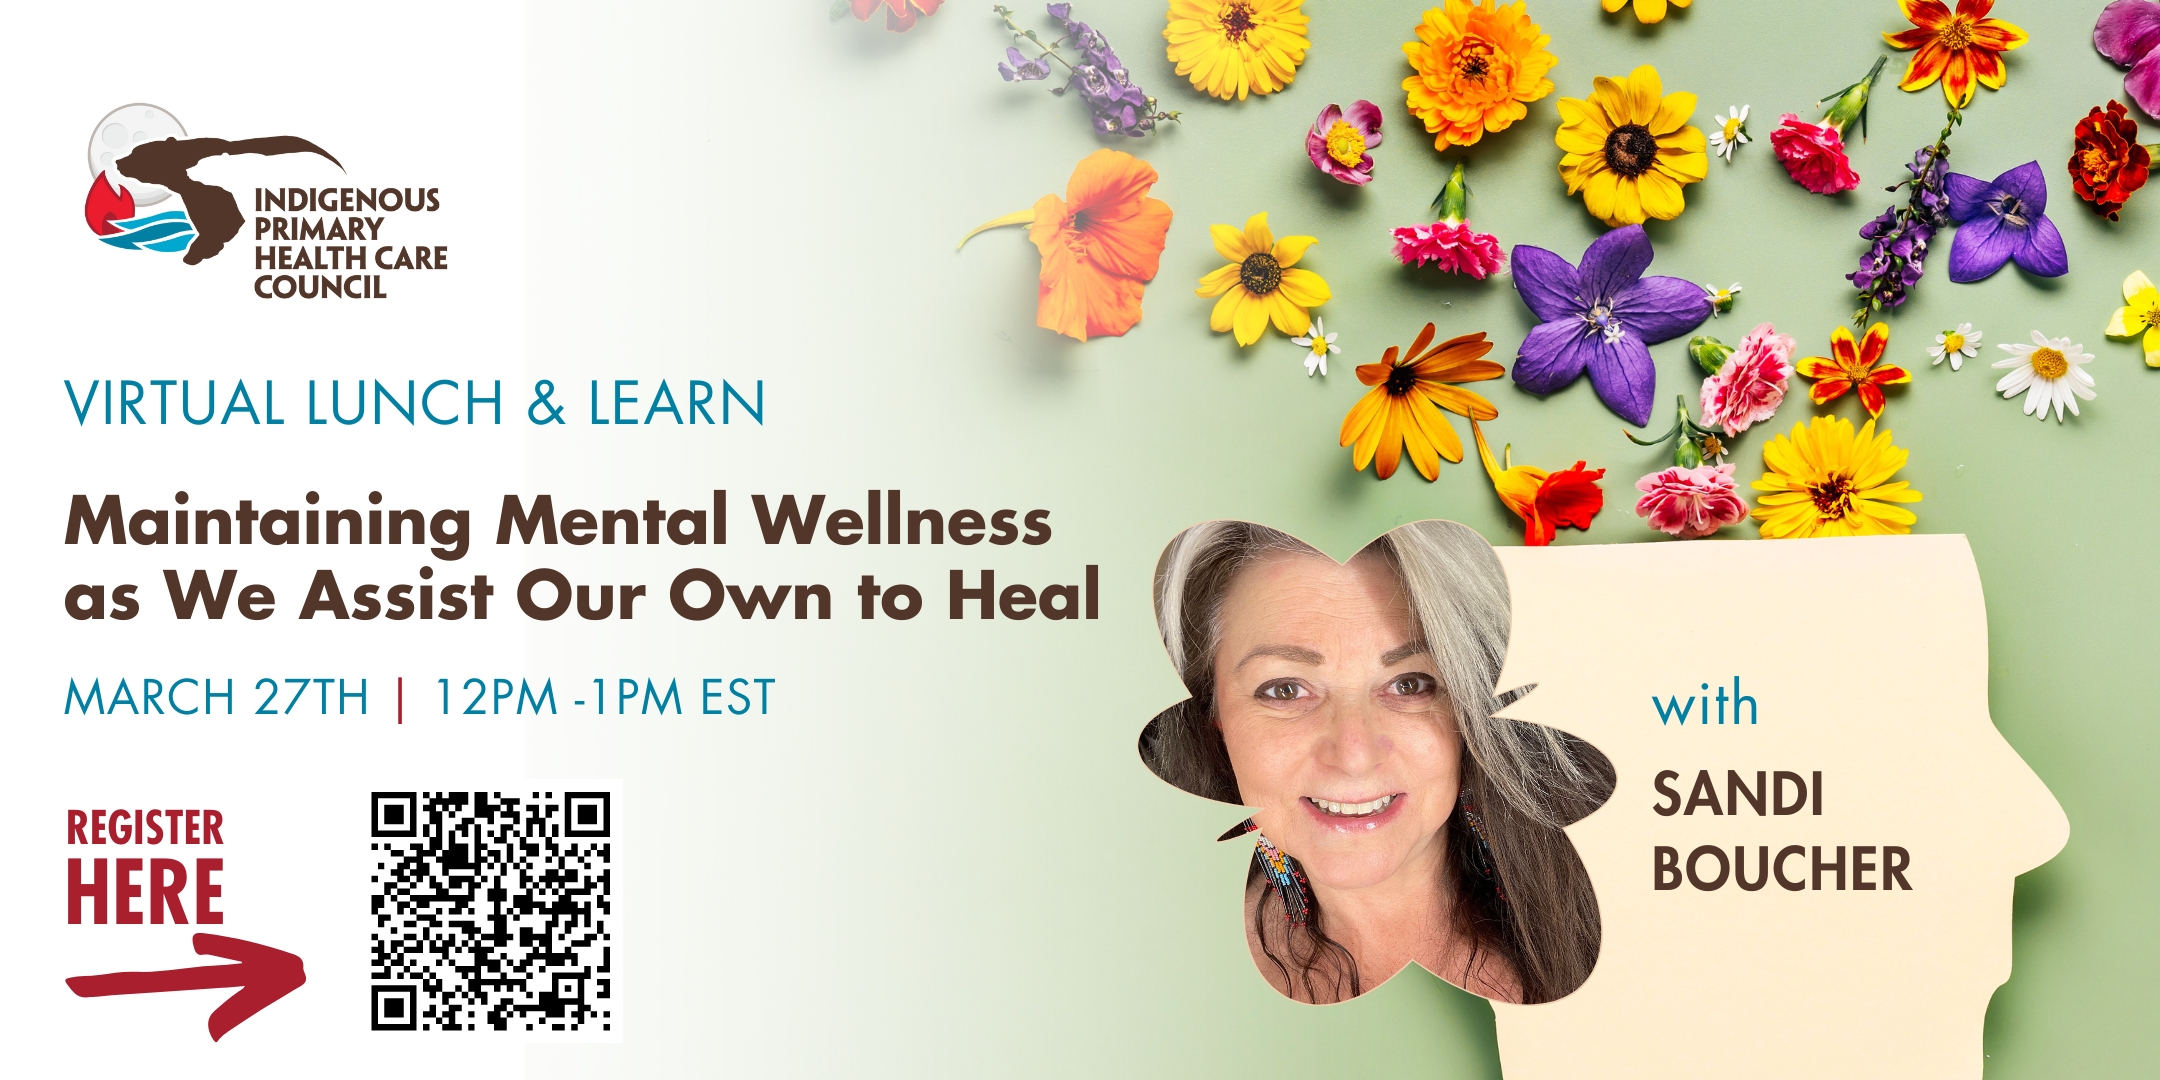 Virtual Lunch and Learn: Maintaining Mental Wellness as We Assist Our Own to Heal